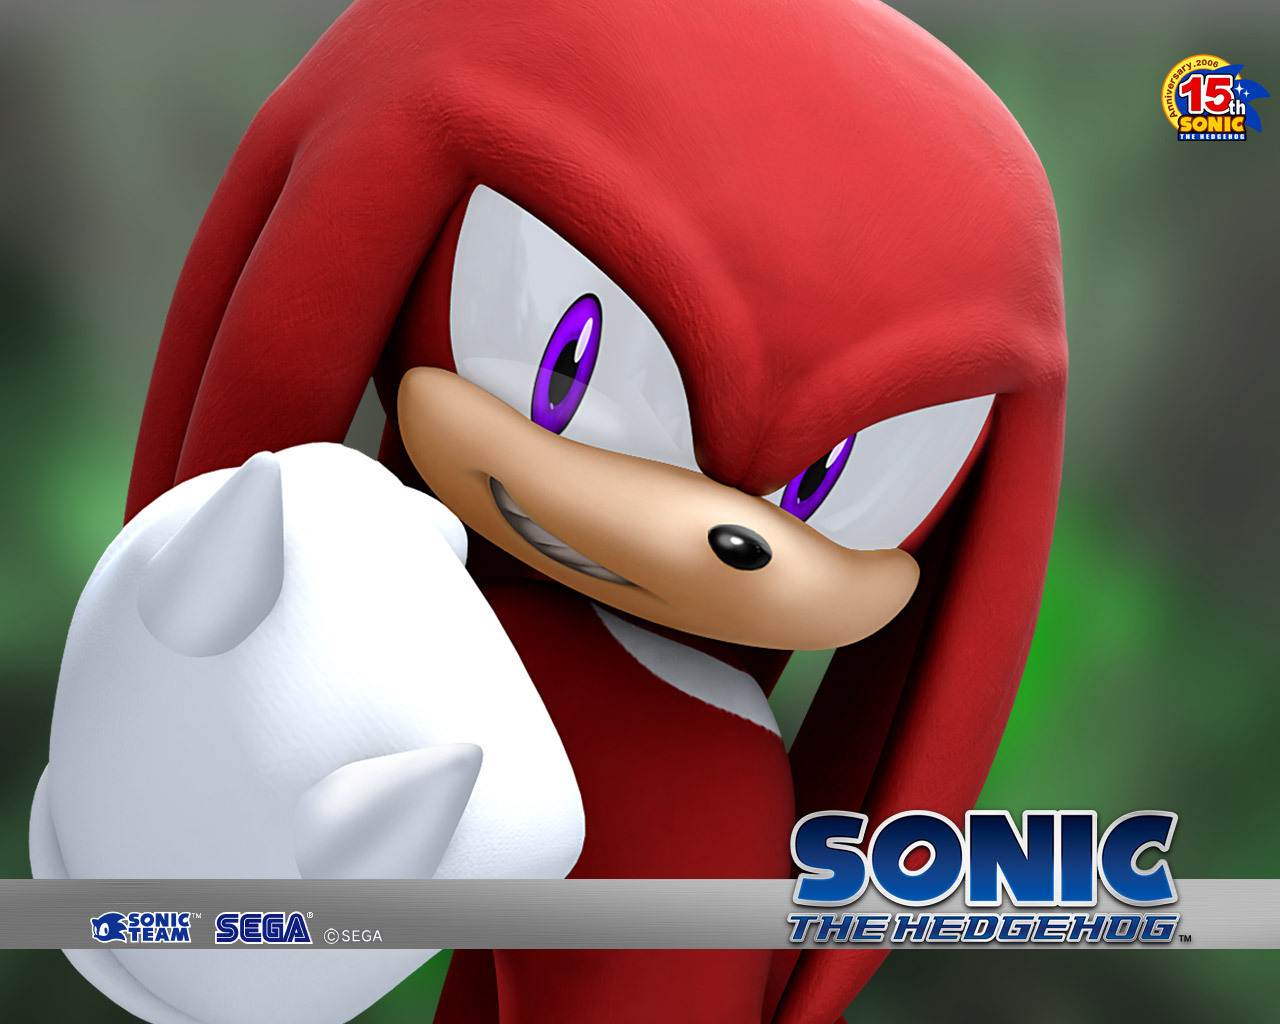 knuckles-sonic-characters-2531687-1280-1024.jpg